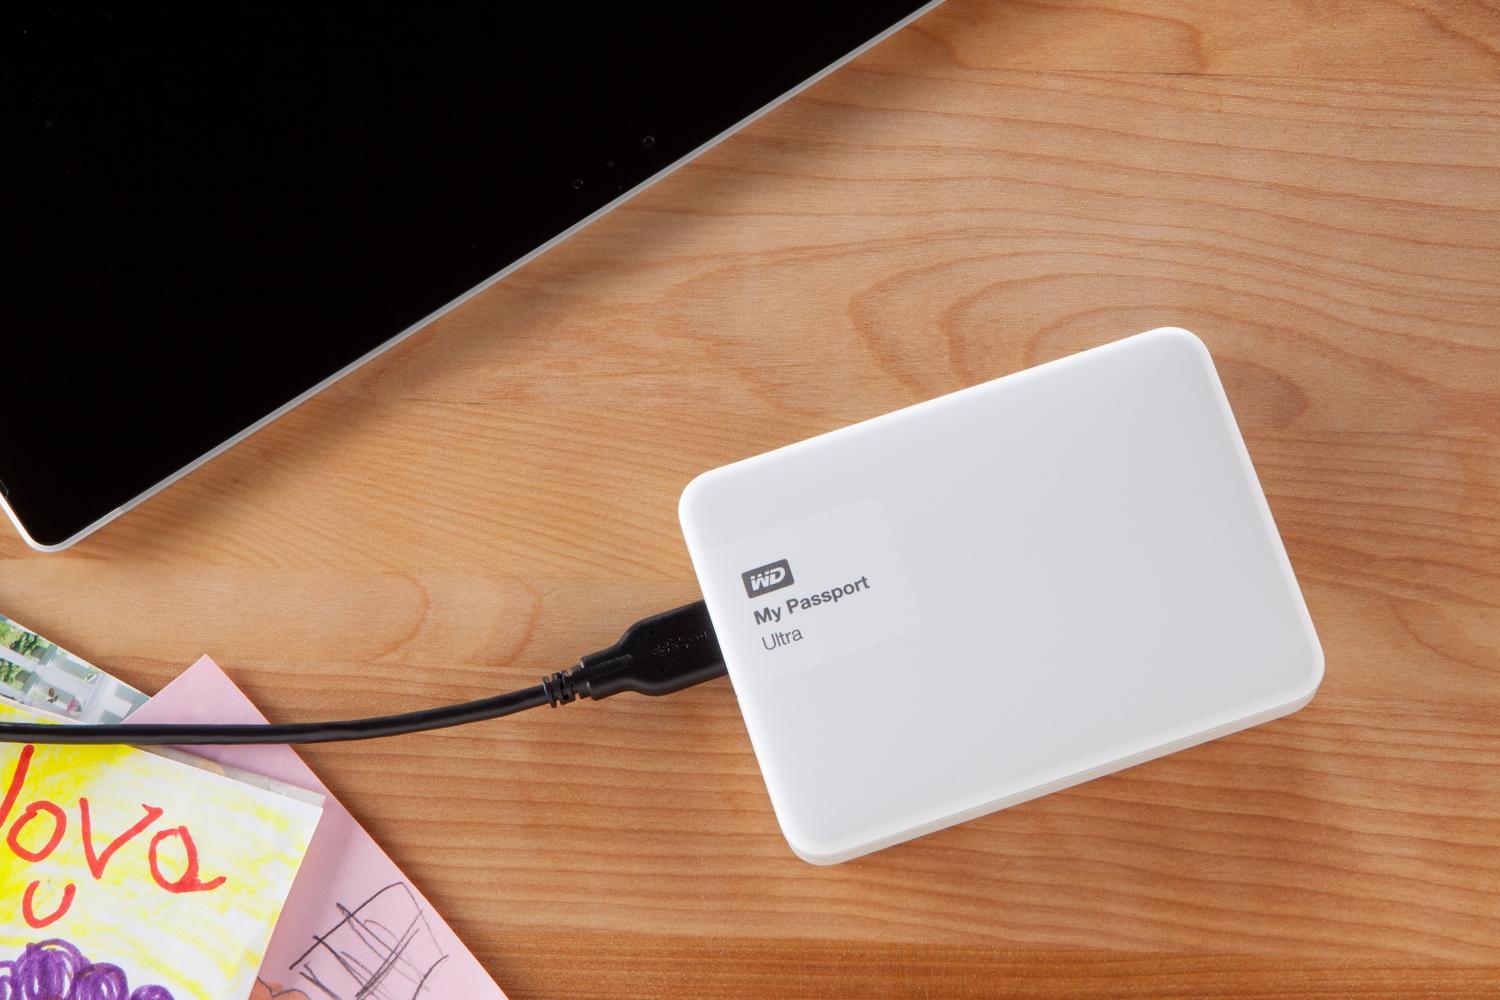 western digital raises portable my passport drive capacity to 3tb adds new colors wd mypassport ultra may2015 2